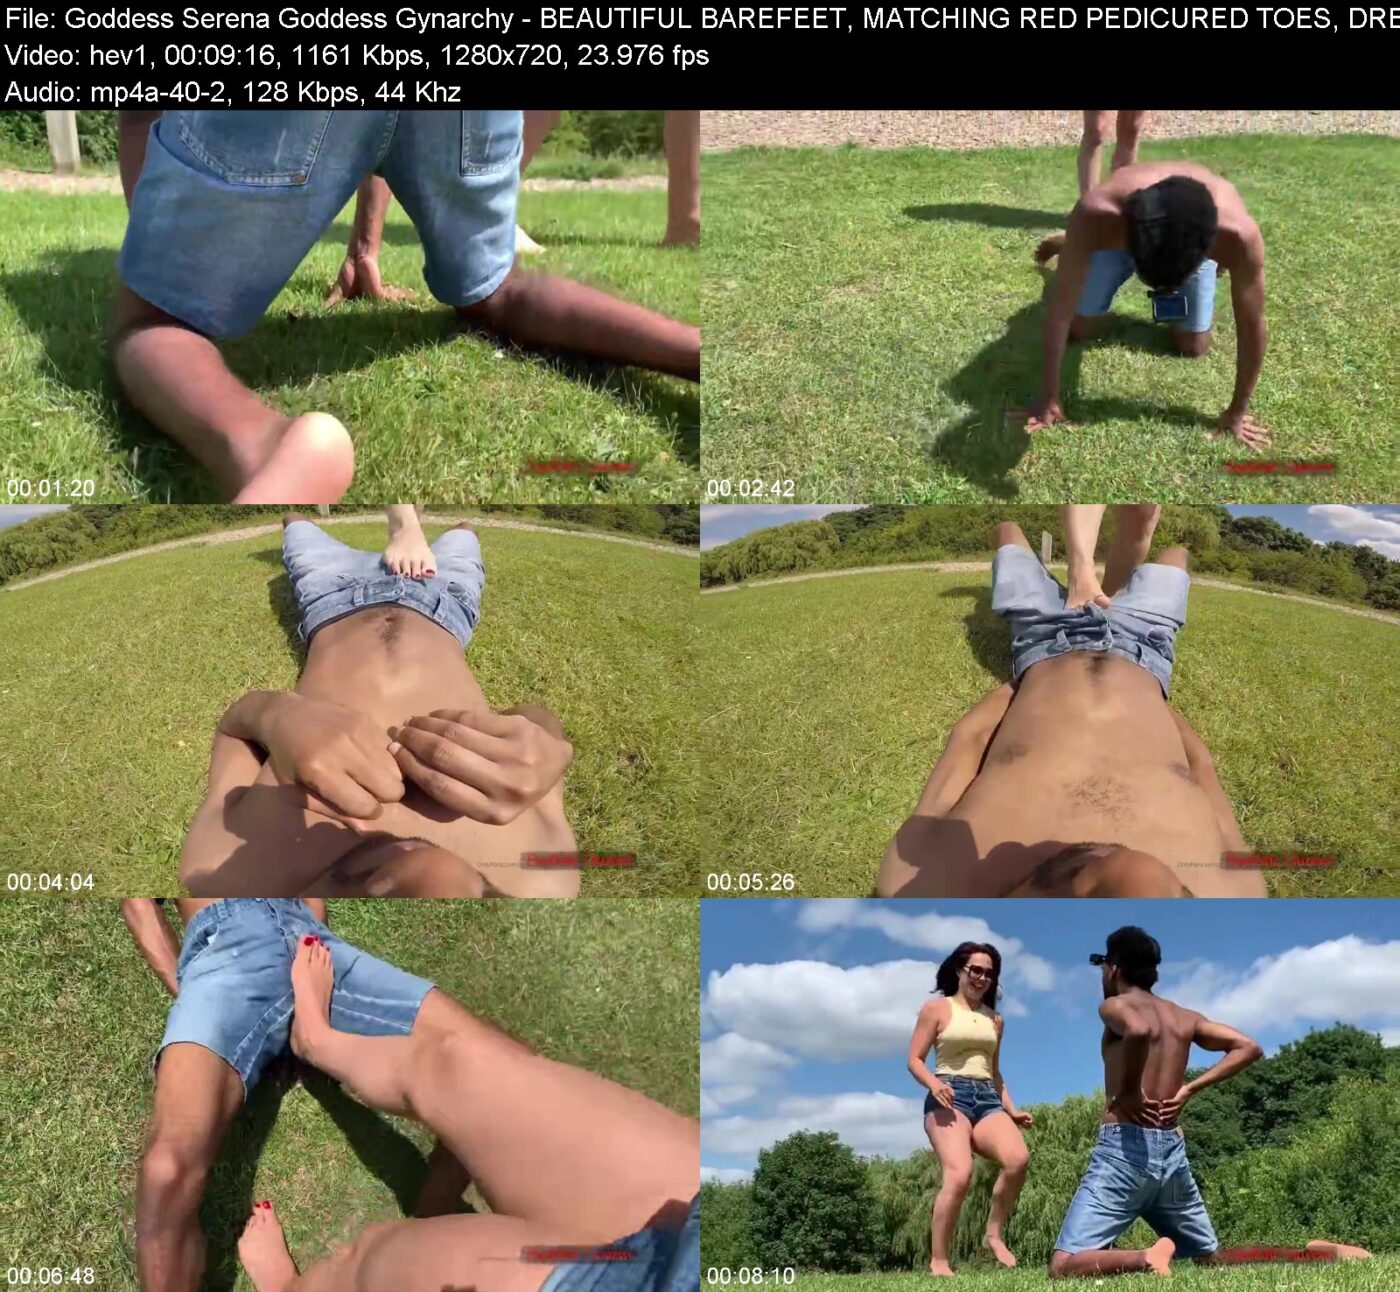 Goddess Serena Goddess Gynarchy - BEAUTIFUL BAREFEET, MATCHING RED PEDICURED TOES, DRESSED CASUALLY IN THEIR JEAN SHORTS AND BRIGHT TOPS